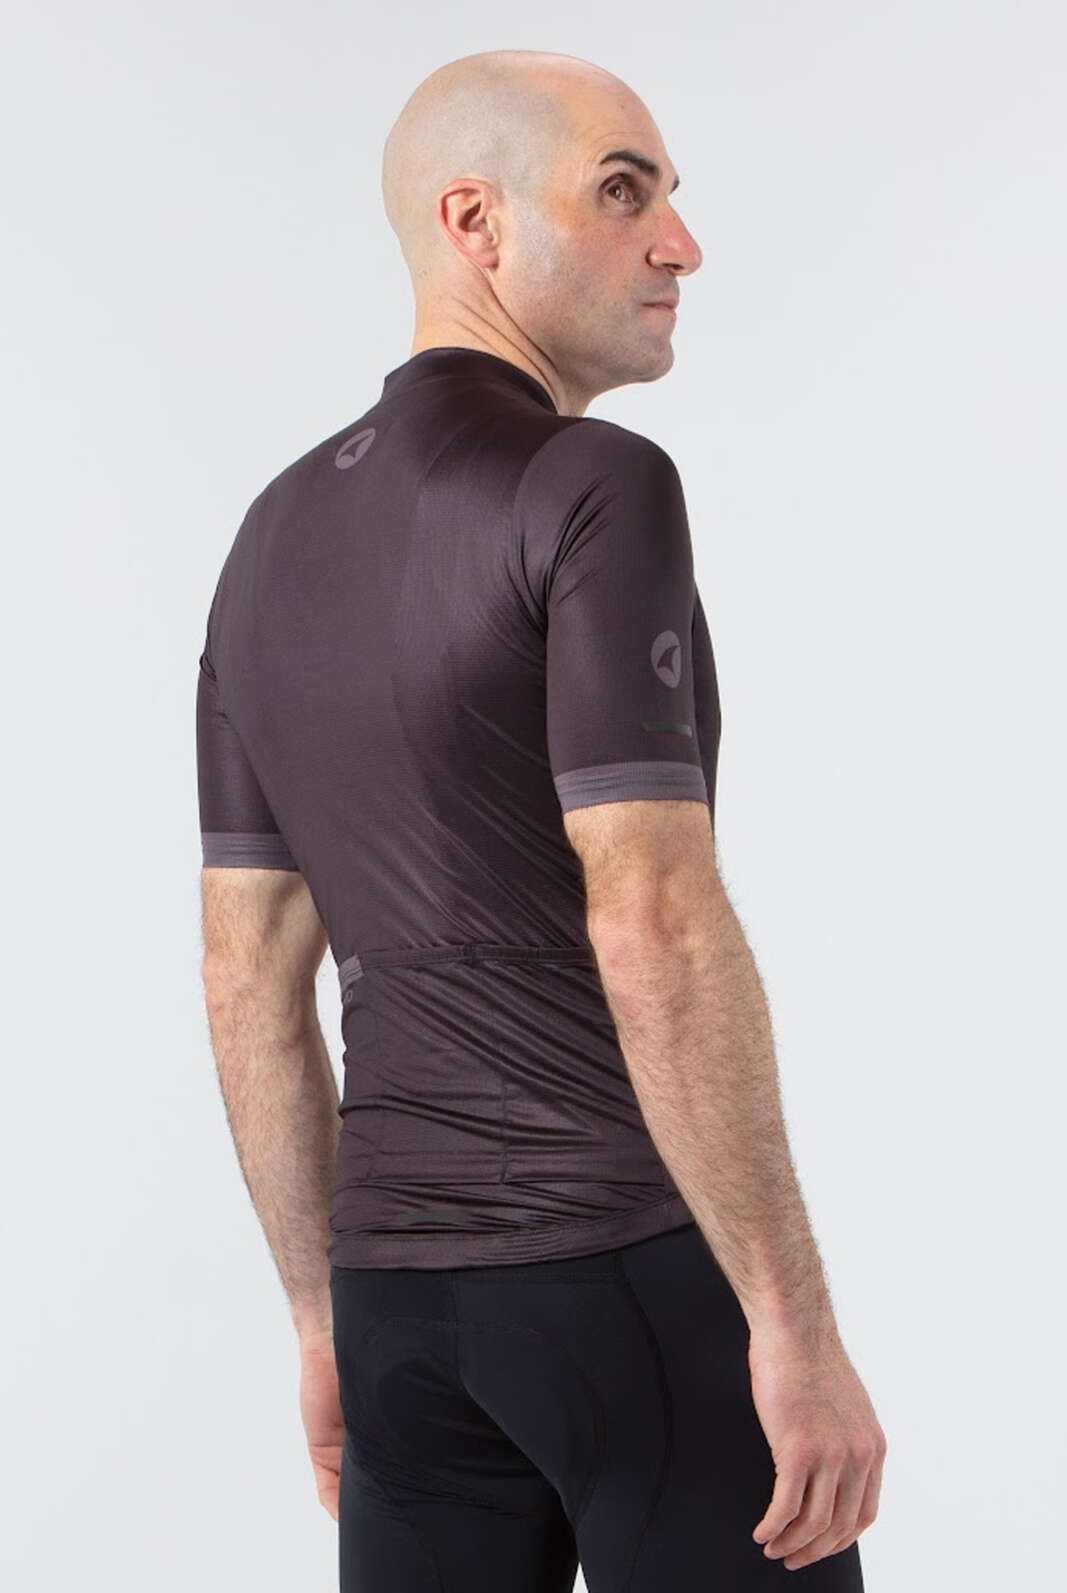 Men's Black Aero Summer Cycling Jersey - Ascent Back View